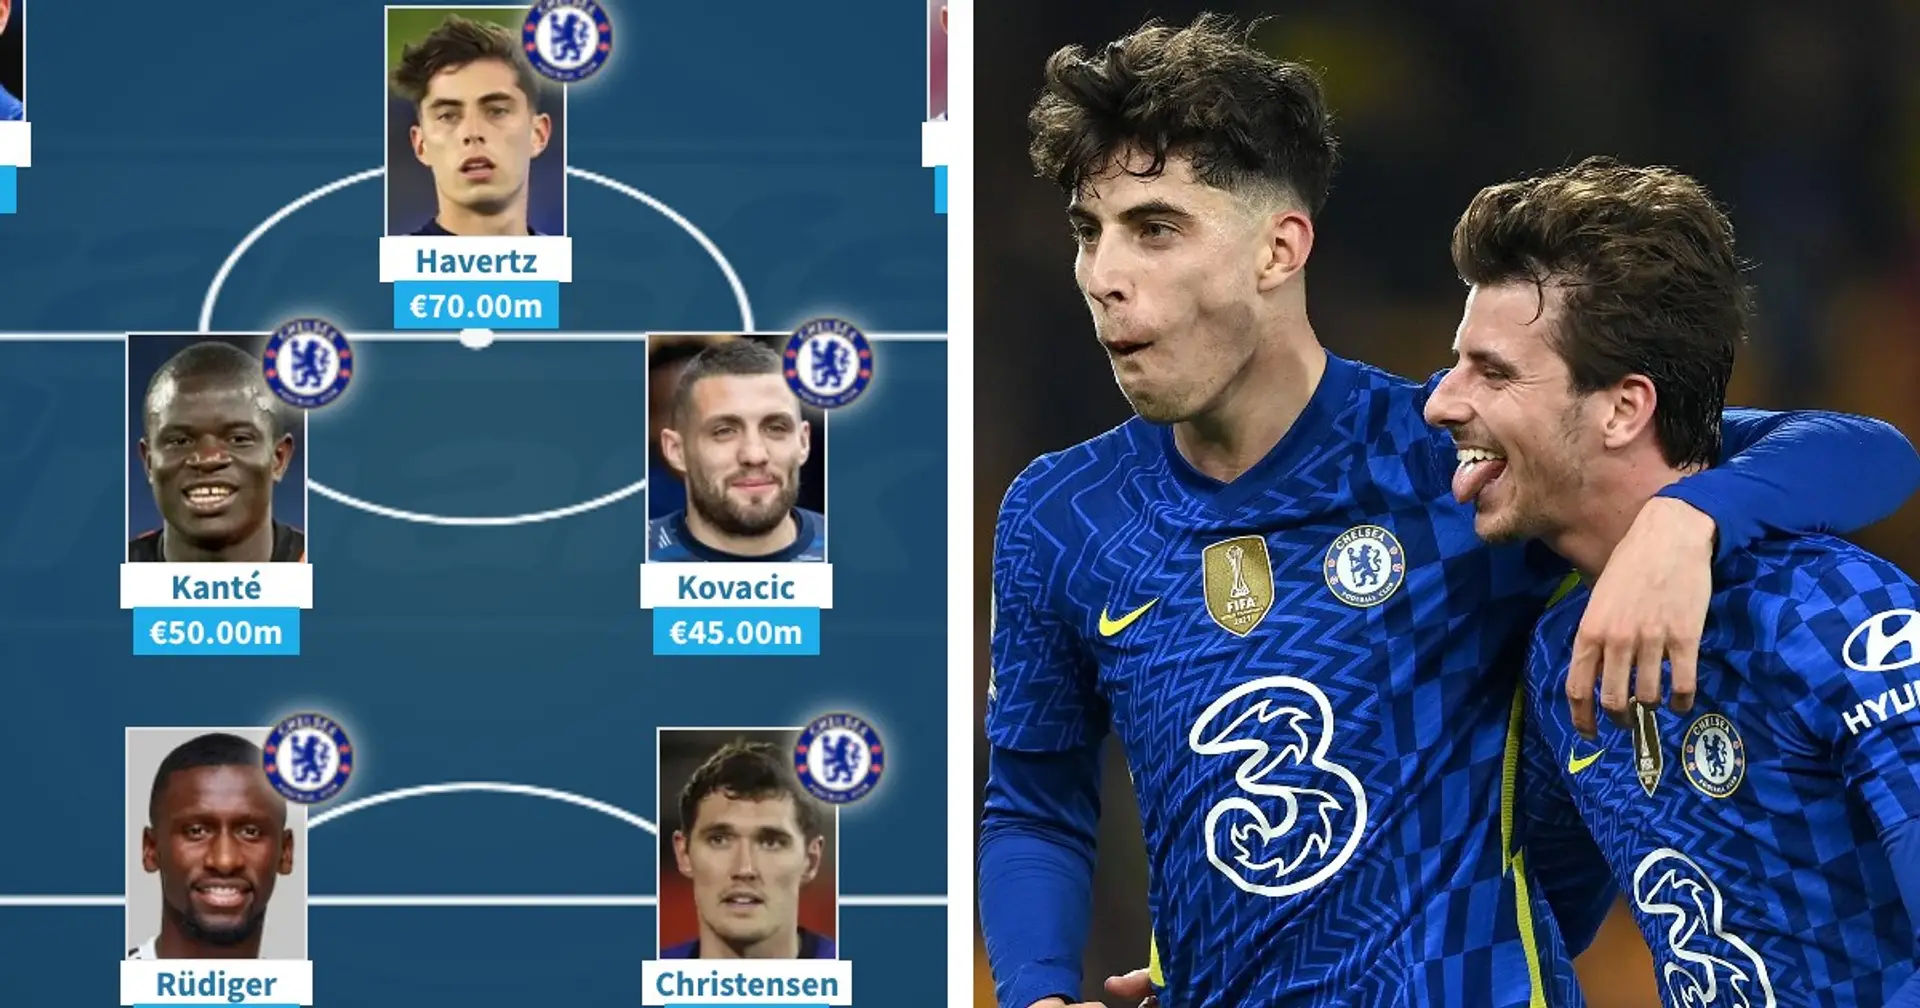 Chelsea's most expensive starting XI revealed: Pulisic and Mount in, Ziyech out